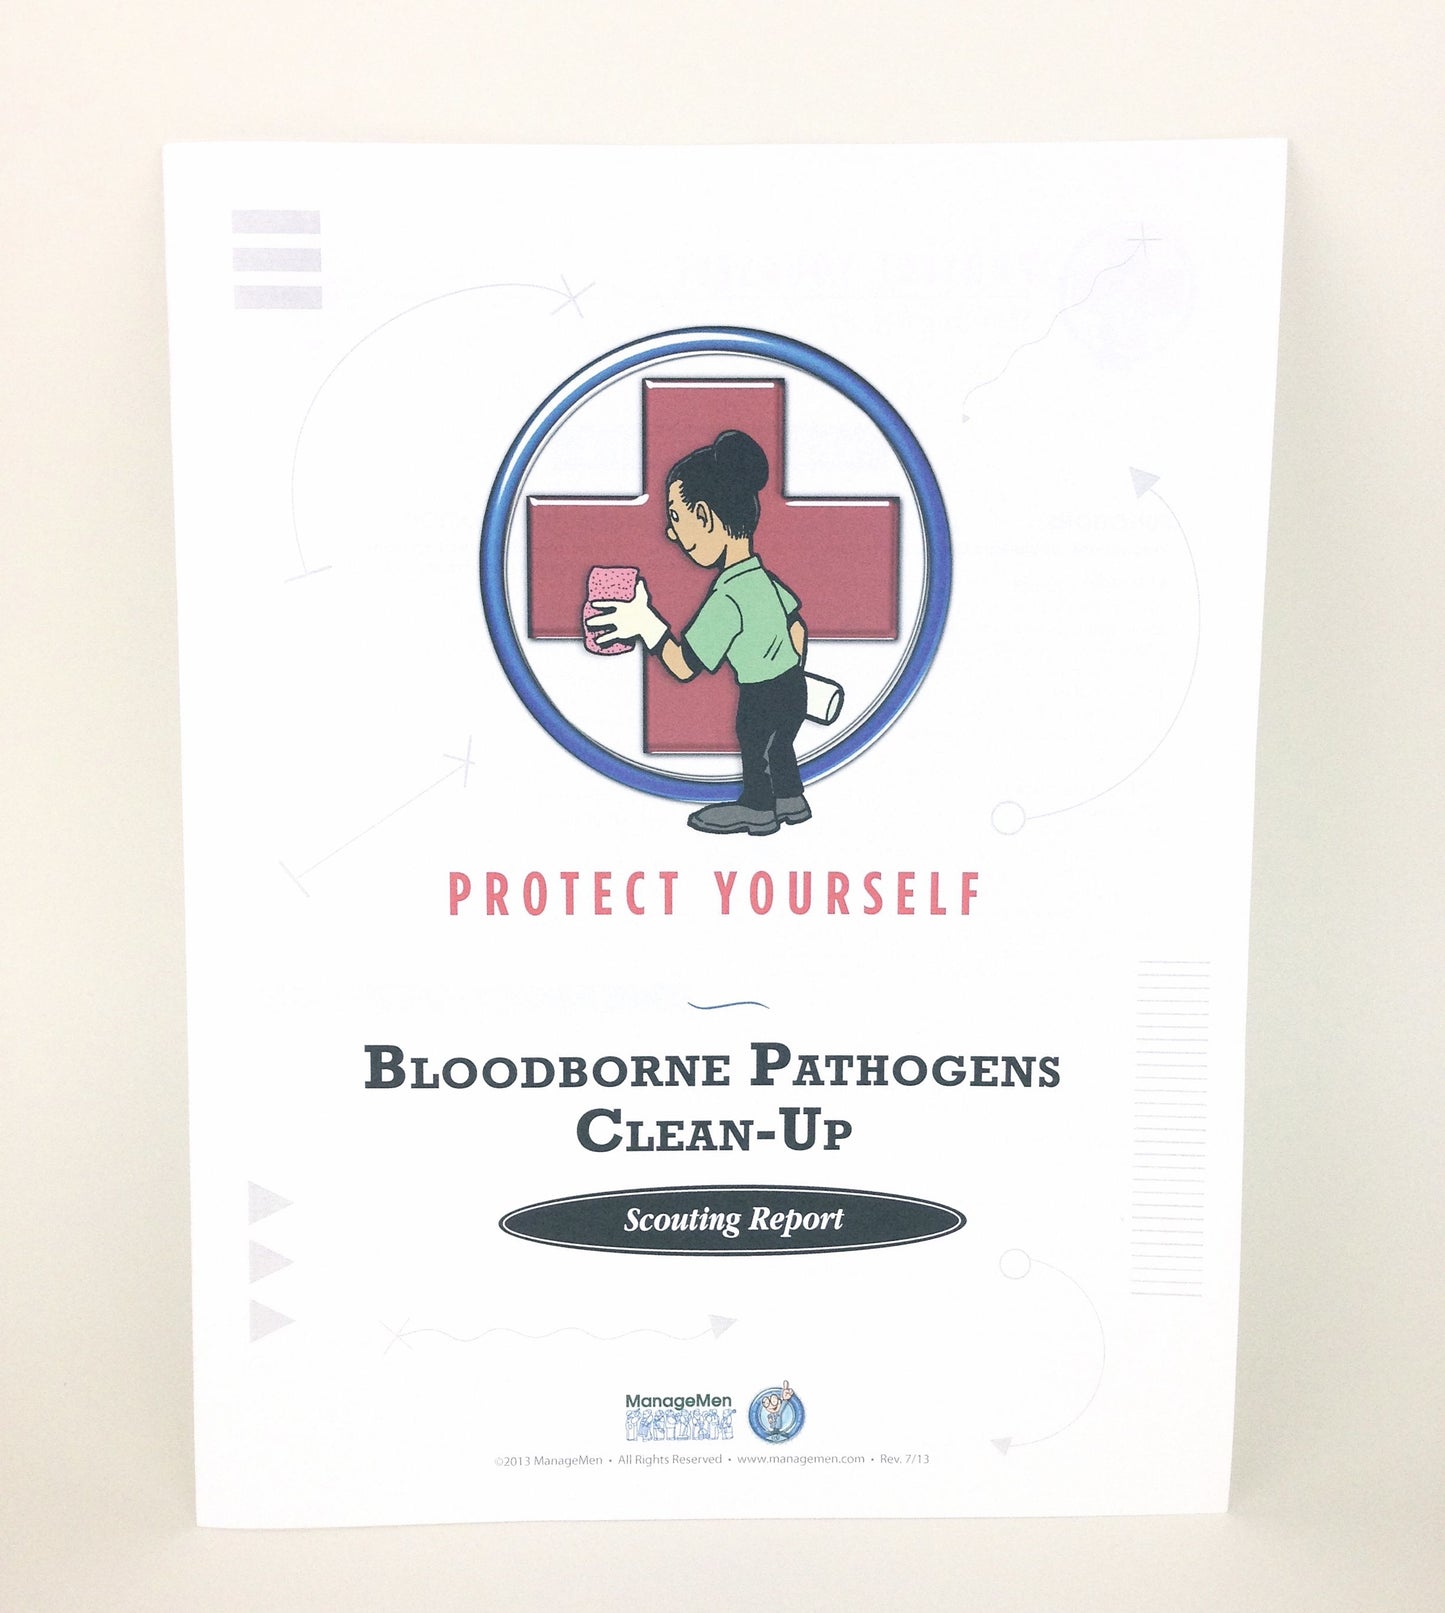 Protect Yourself - Bloodborne Pathogens Clean-Up Scouting Reports